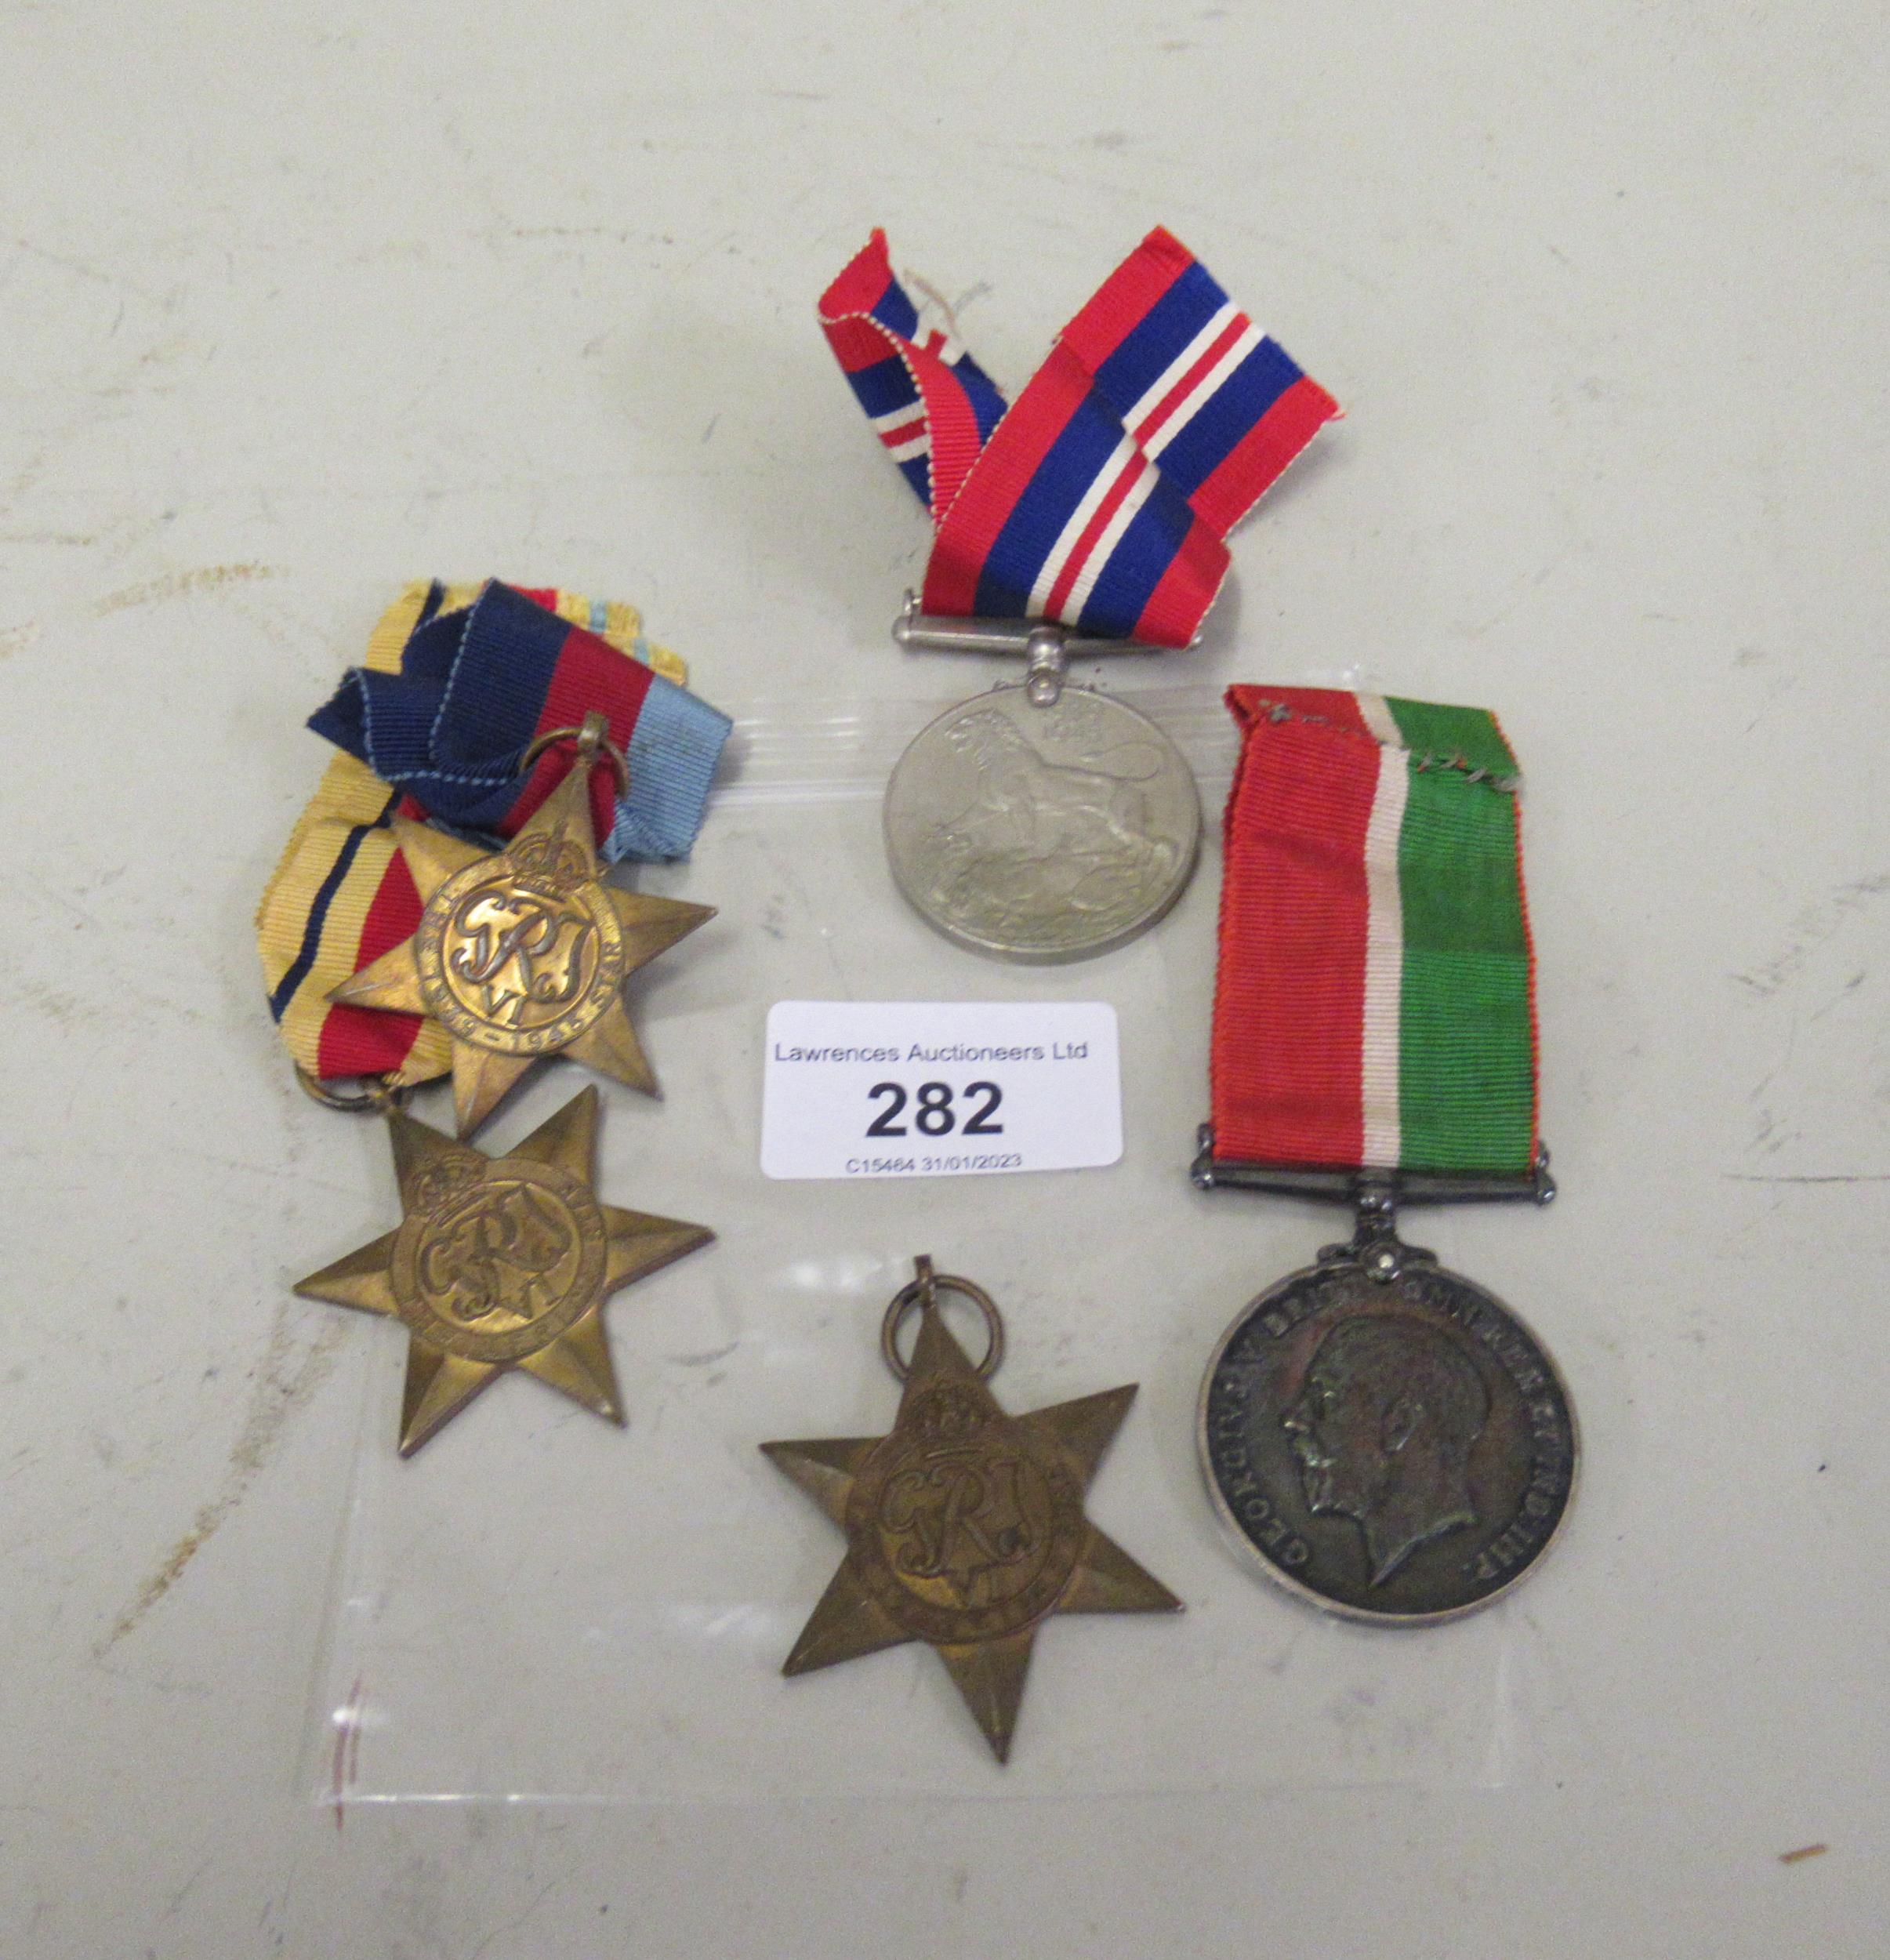 1914 / 1918 Medal awarded to Alfred Anderson and four World War II medals, including three stars